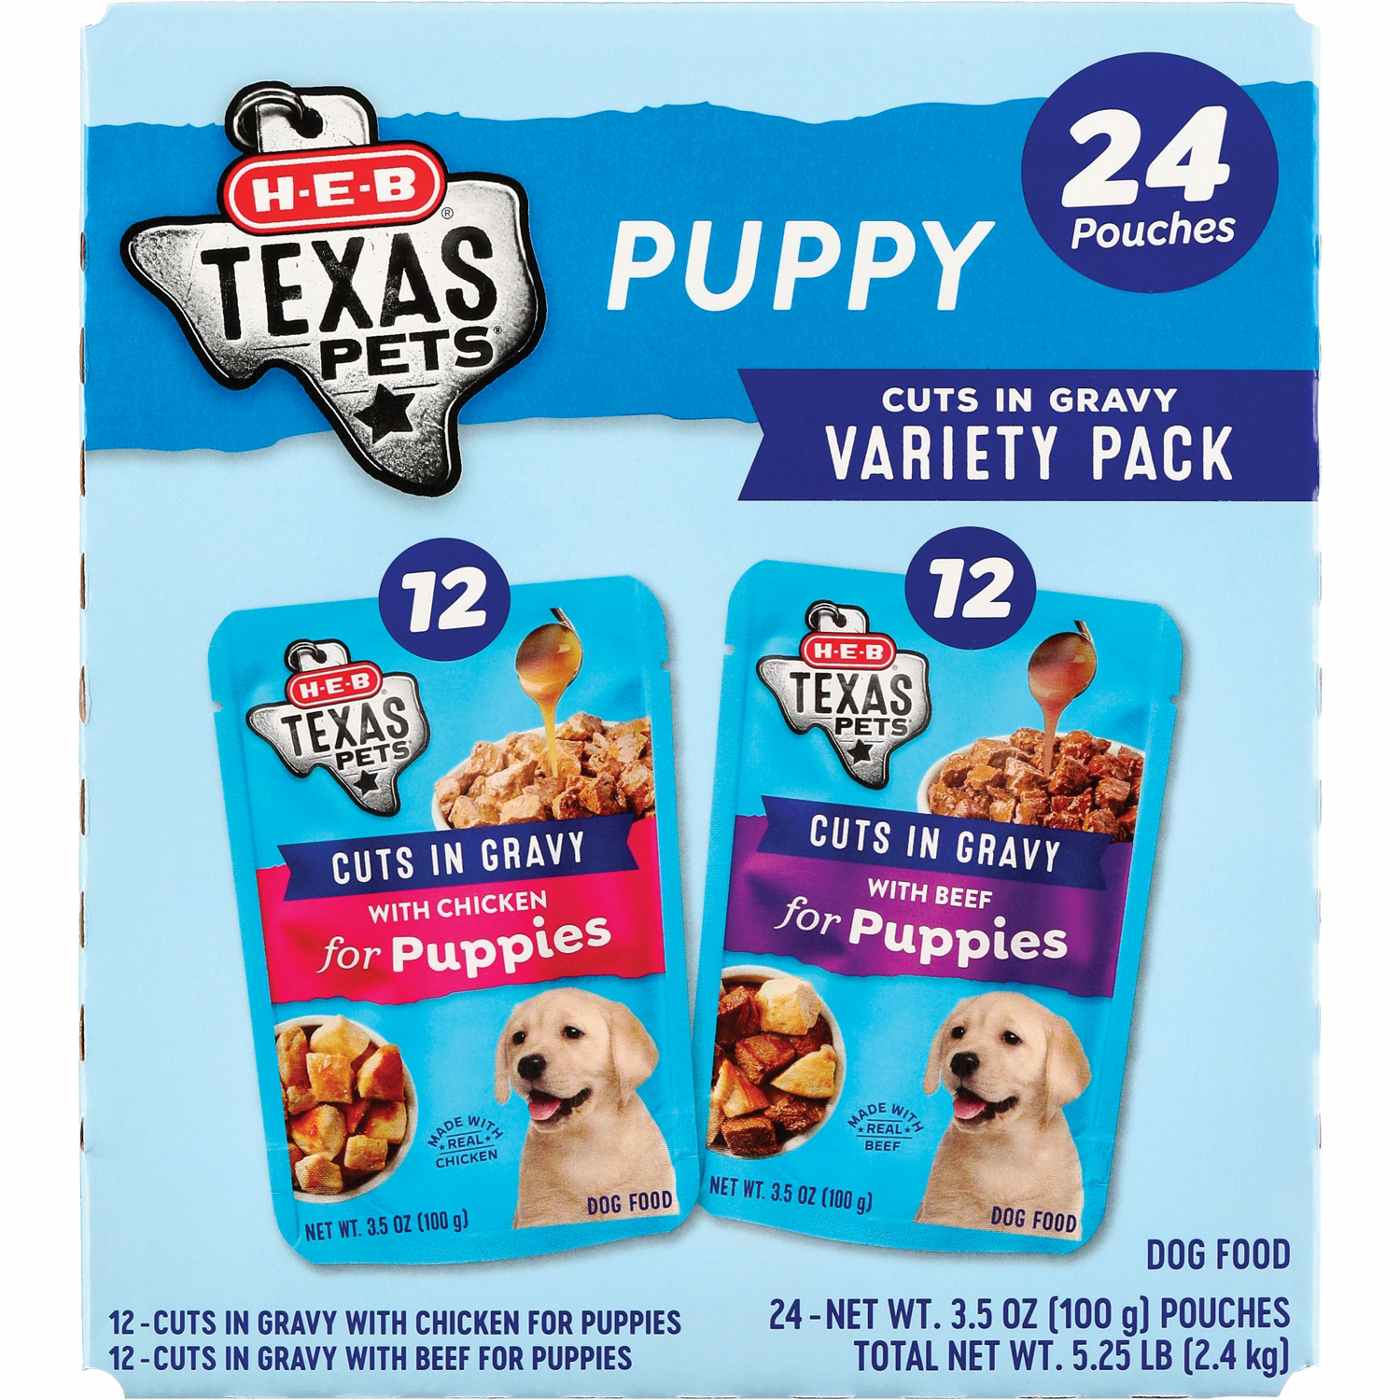 H-E-B Texas Pets Cuts in Gravy Wet Puppy Dog Food Pouches Variety Pack - Chicken & Beef; image 1 of 2